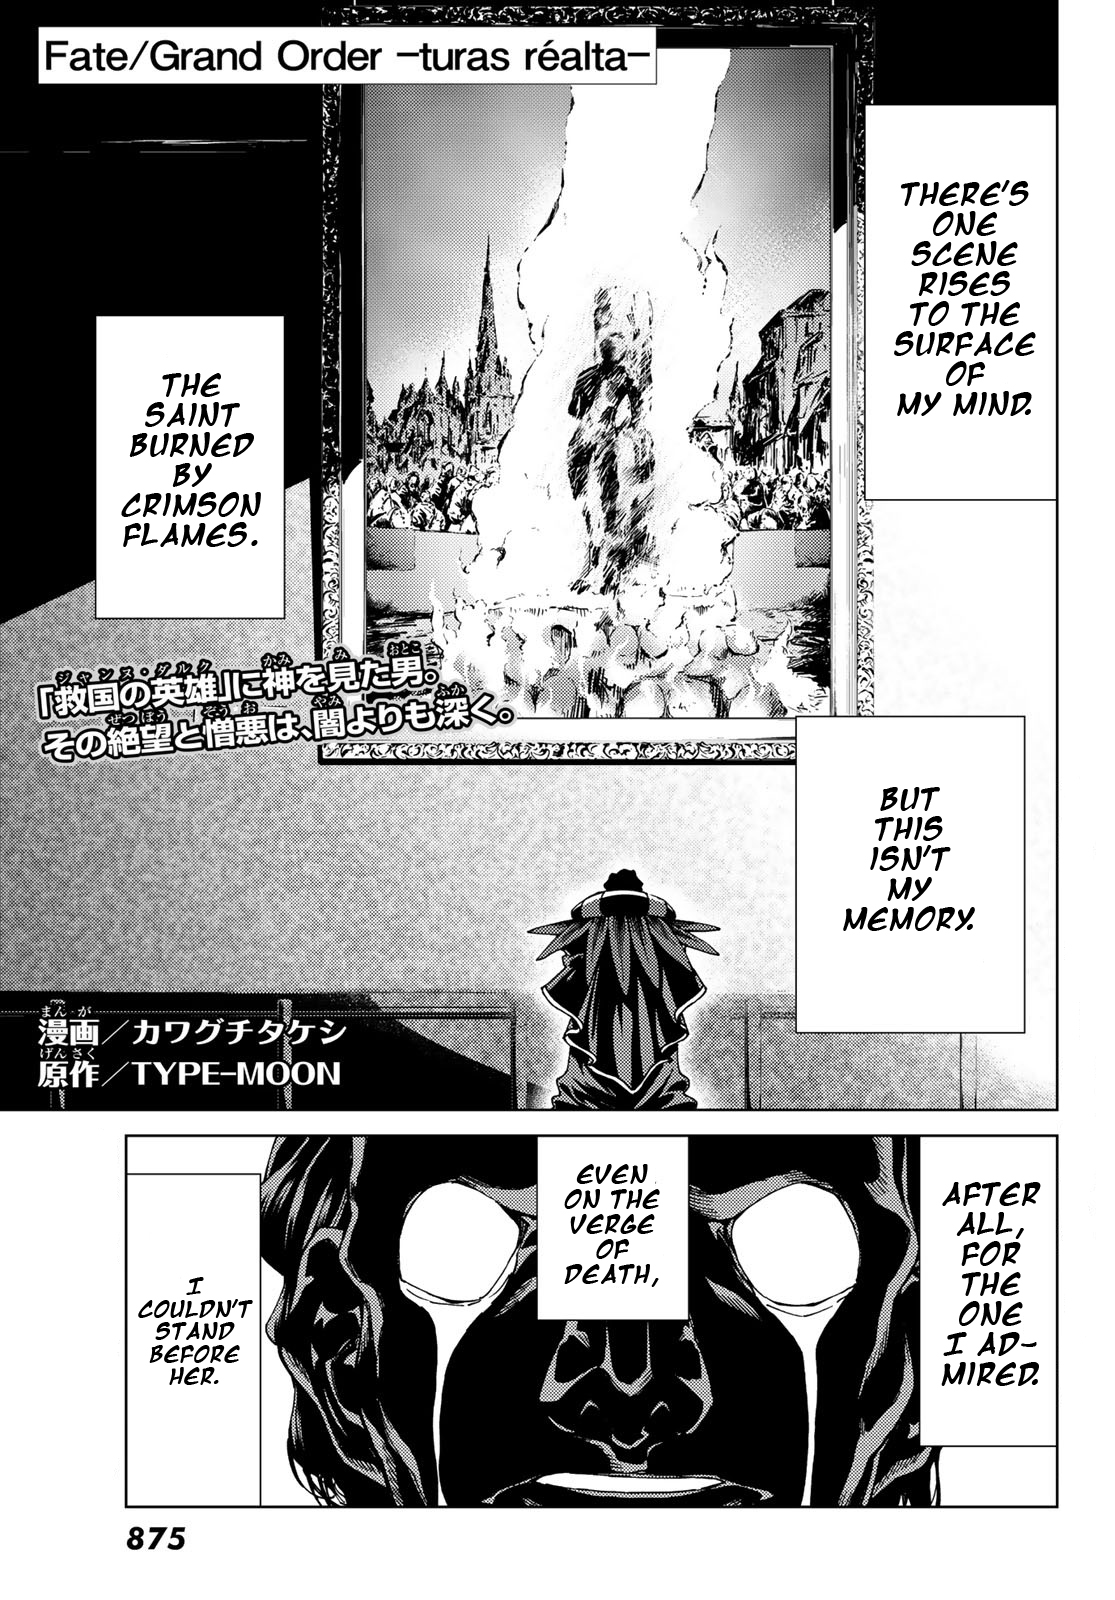 Fate/grand Order -Turas Réalta- Vol.4 Chapter 17: First Singularity: The Patriotic Holy Maiden 1 - Picture 1